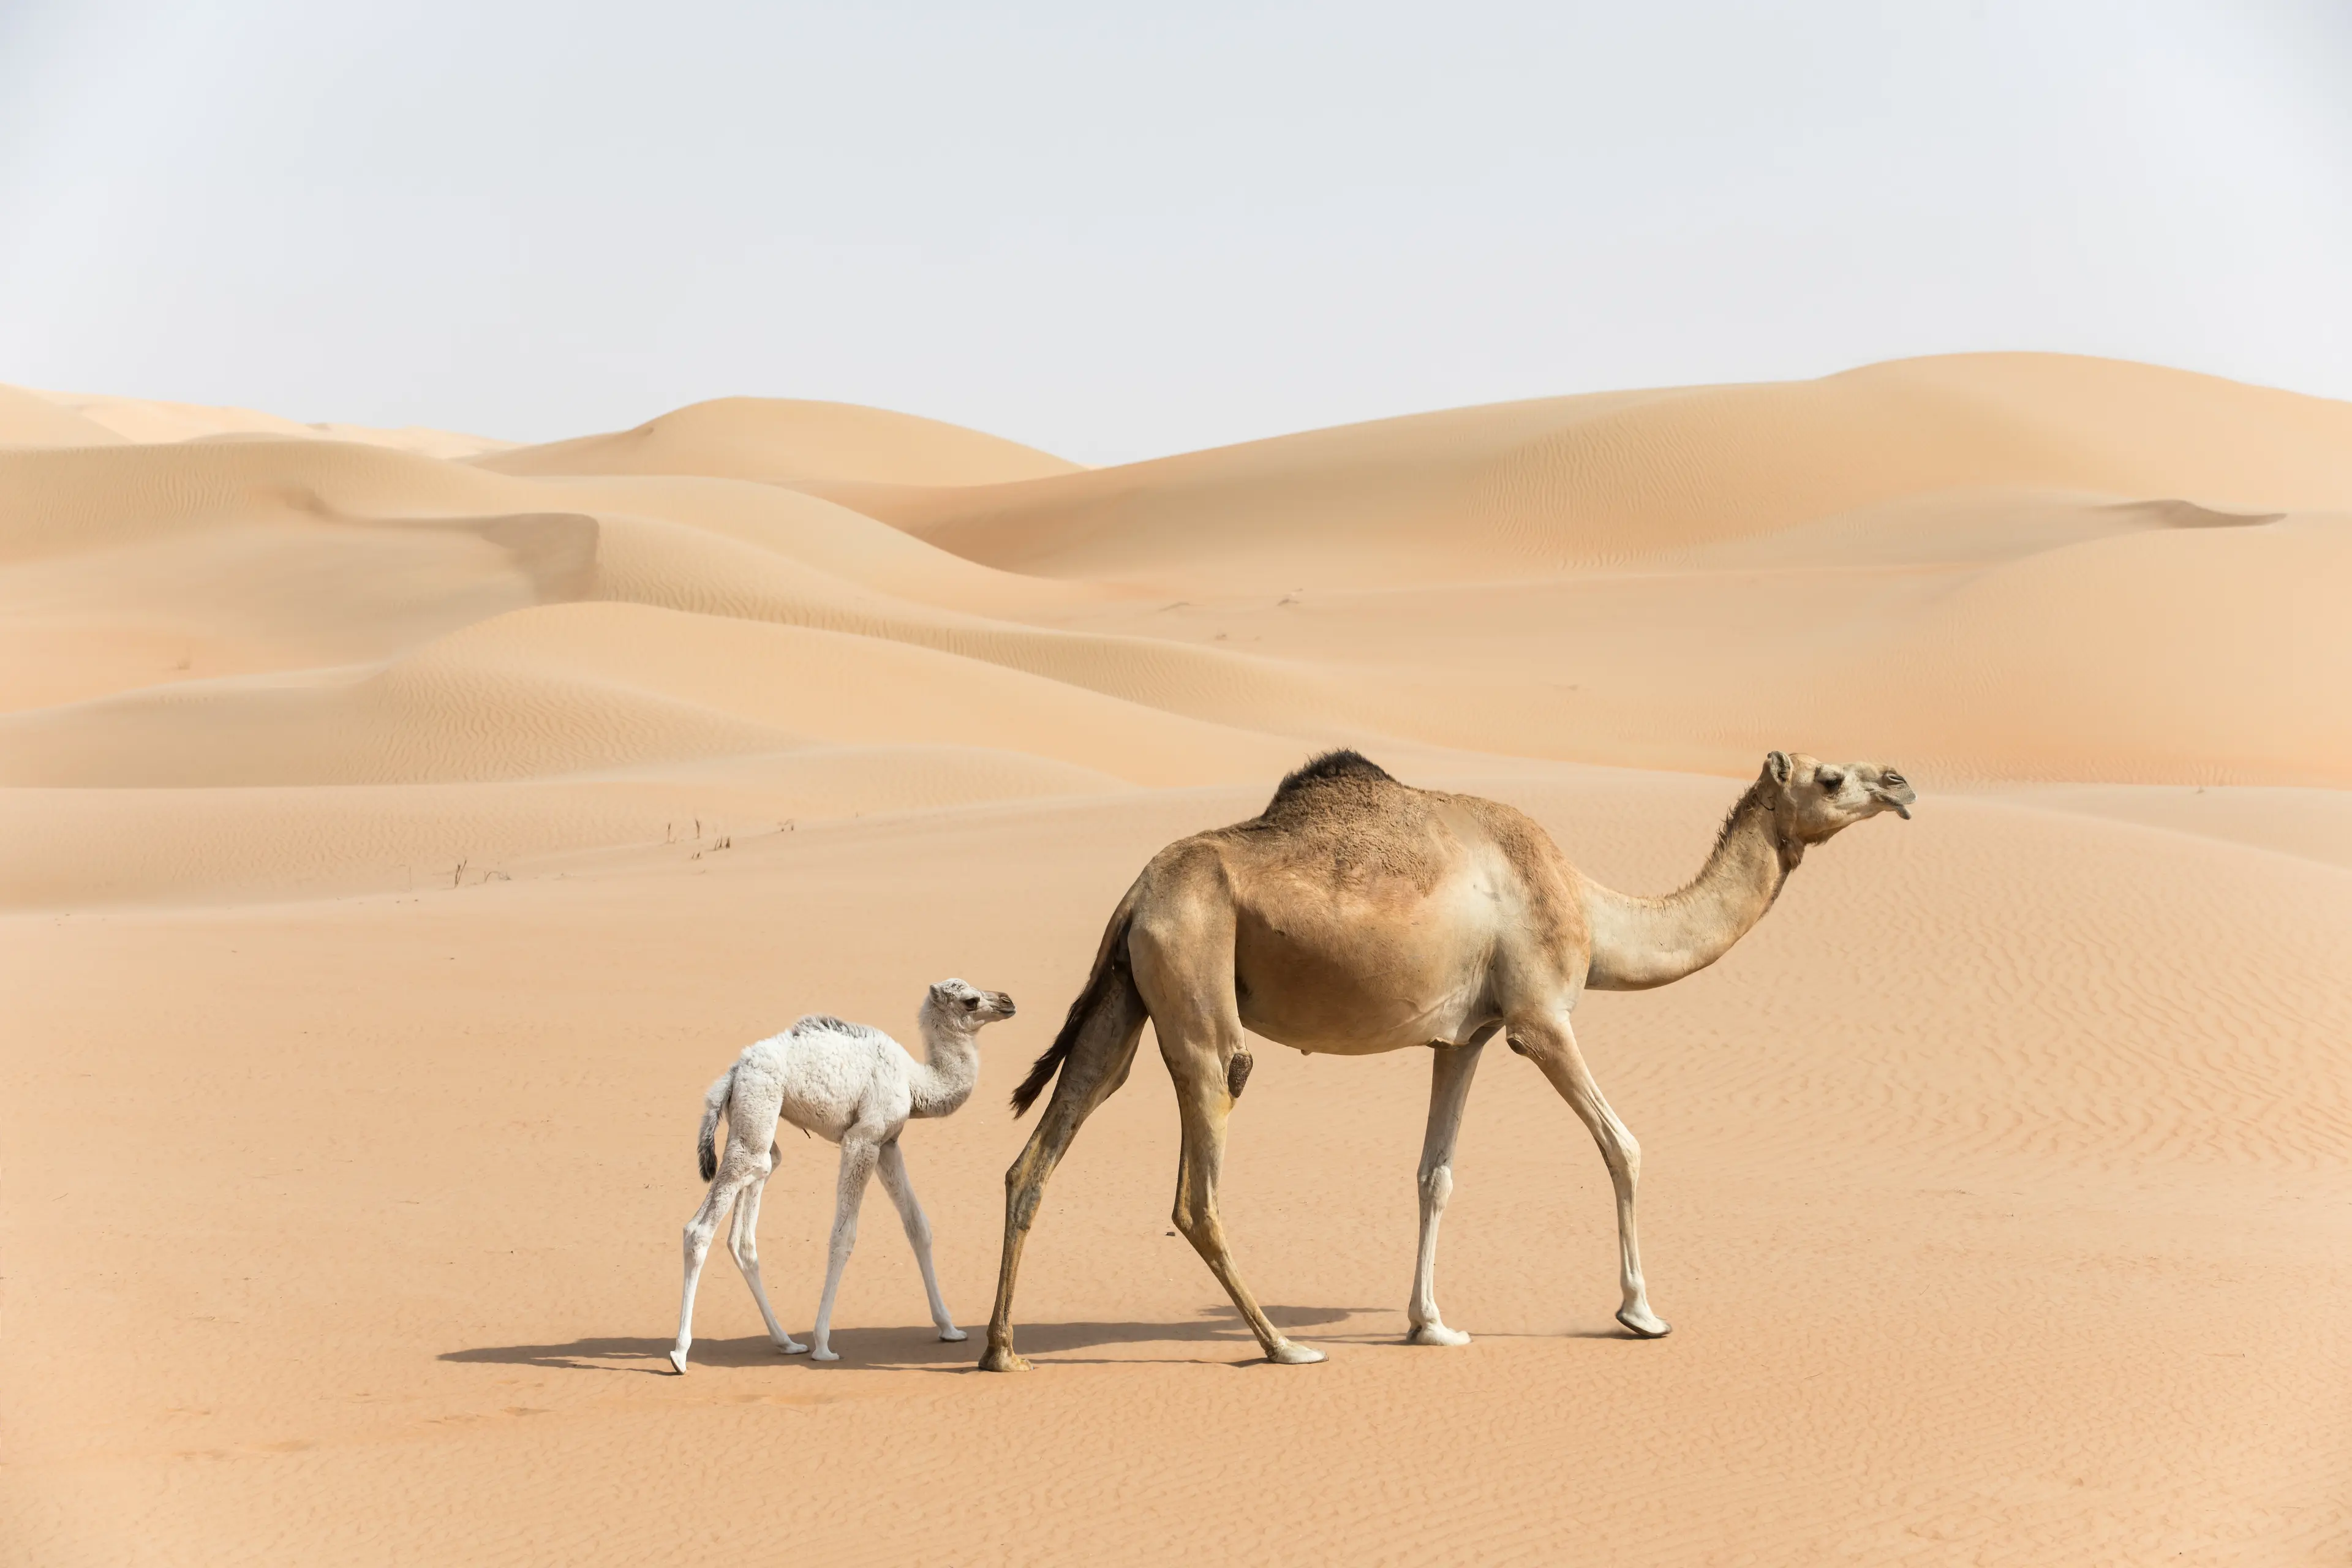 Camel mother walking with her baby in the desert